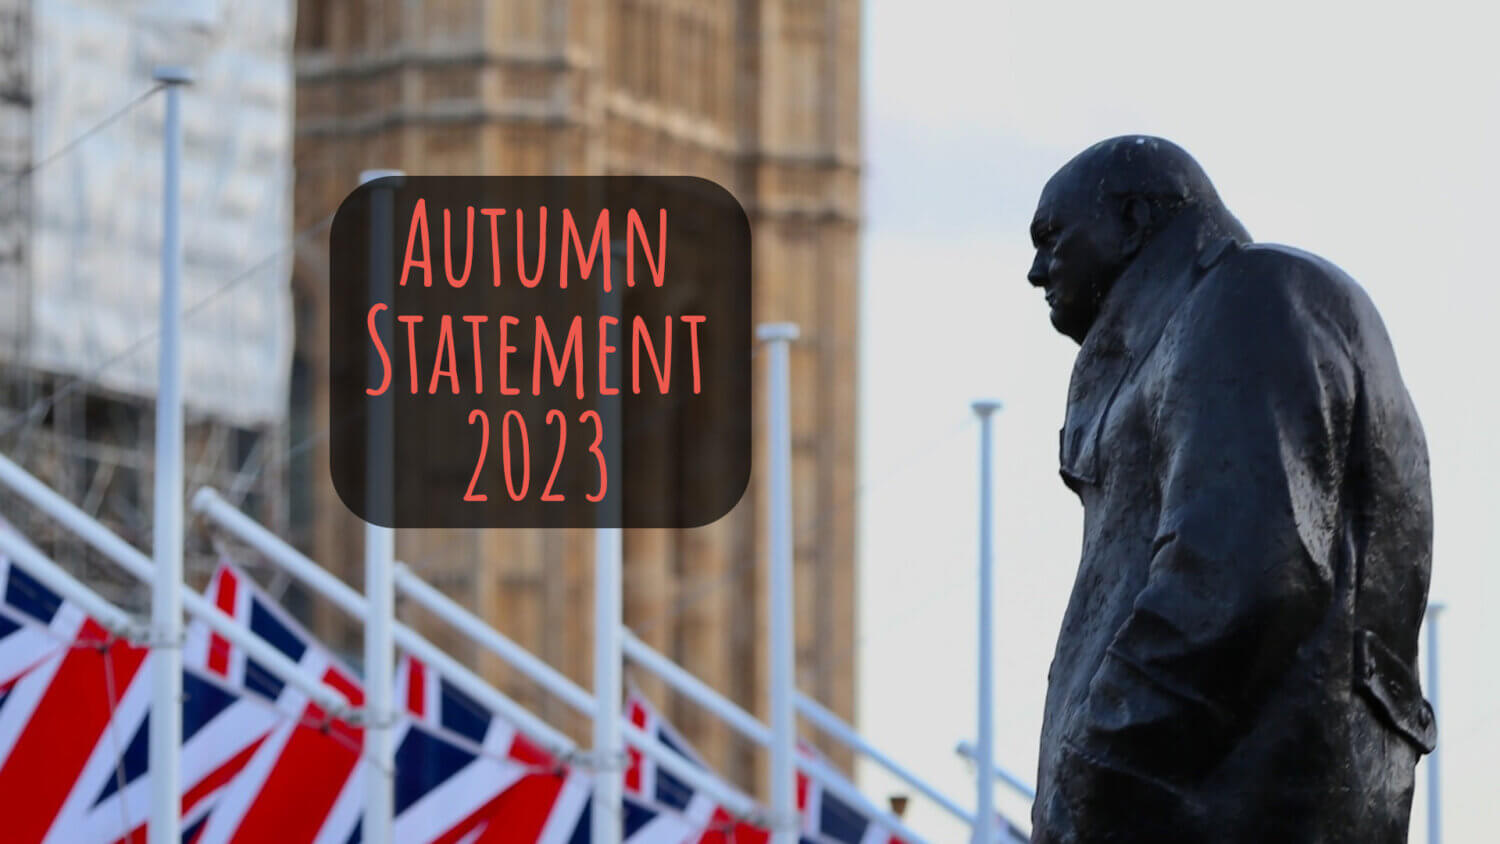 Autumn Statement 2023 - Winston Churchill Statue with Houses of Parliament in the background.